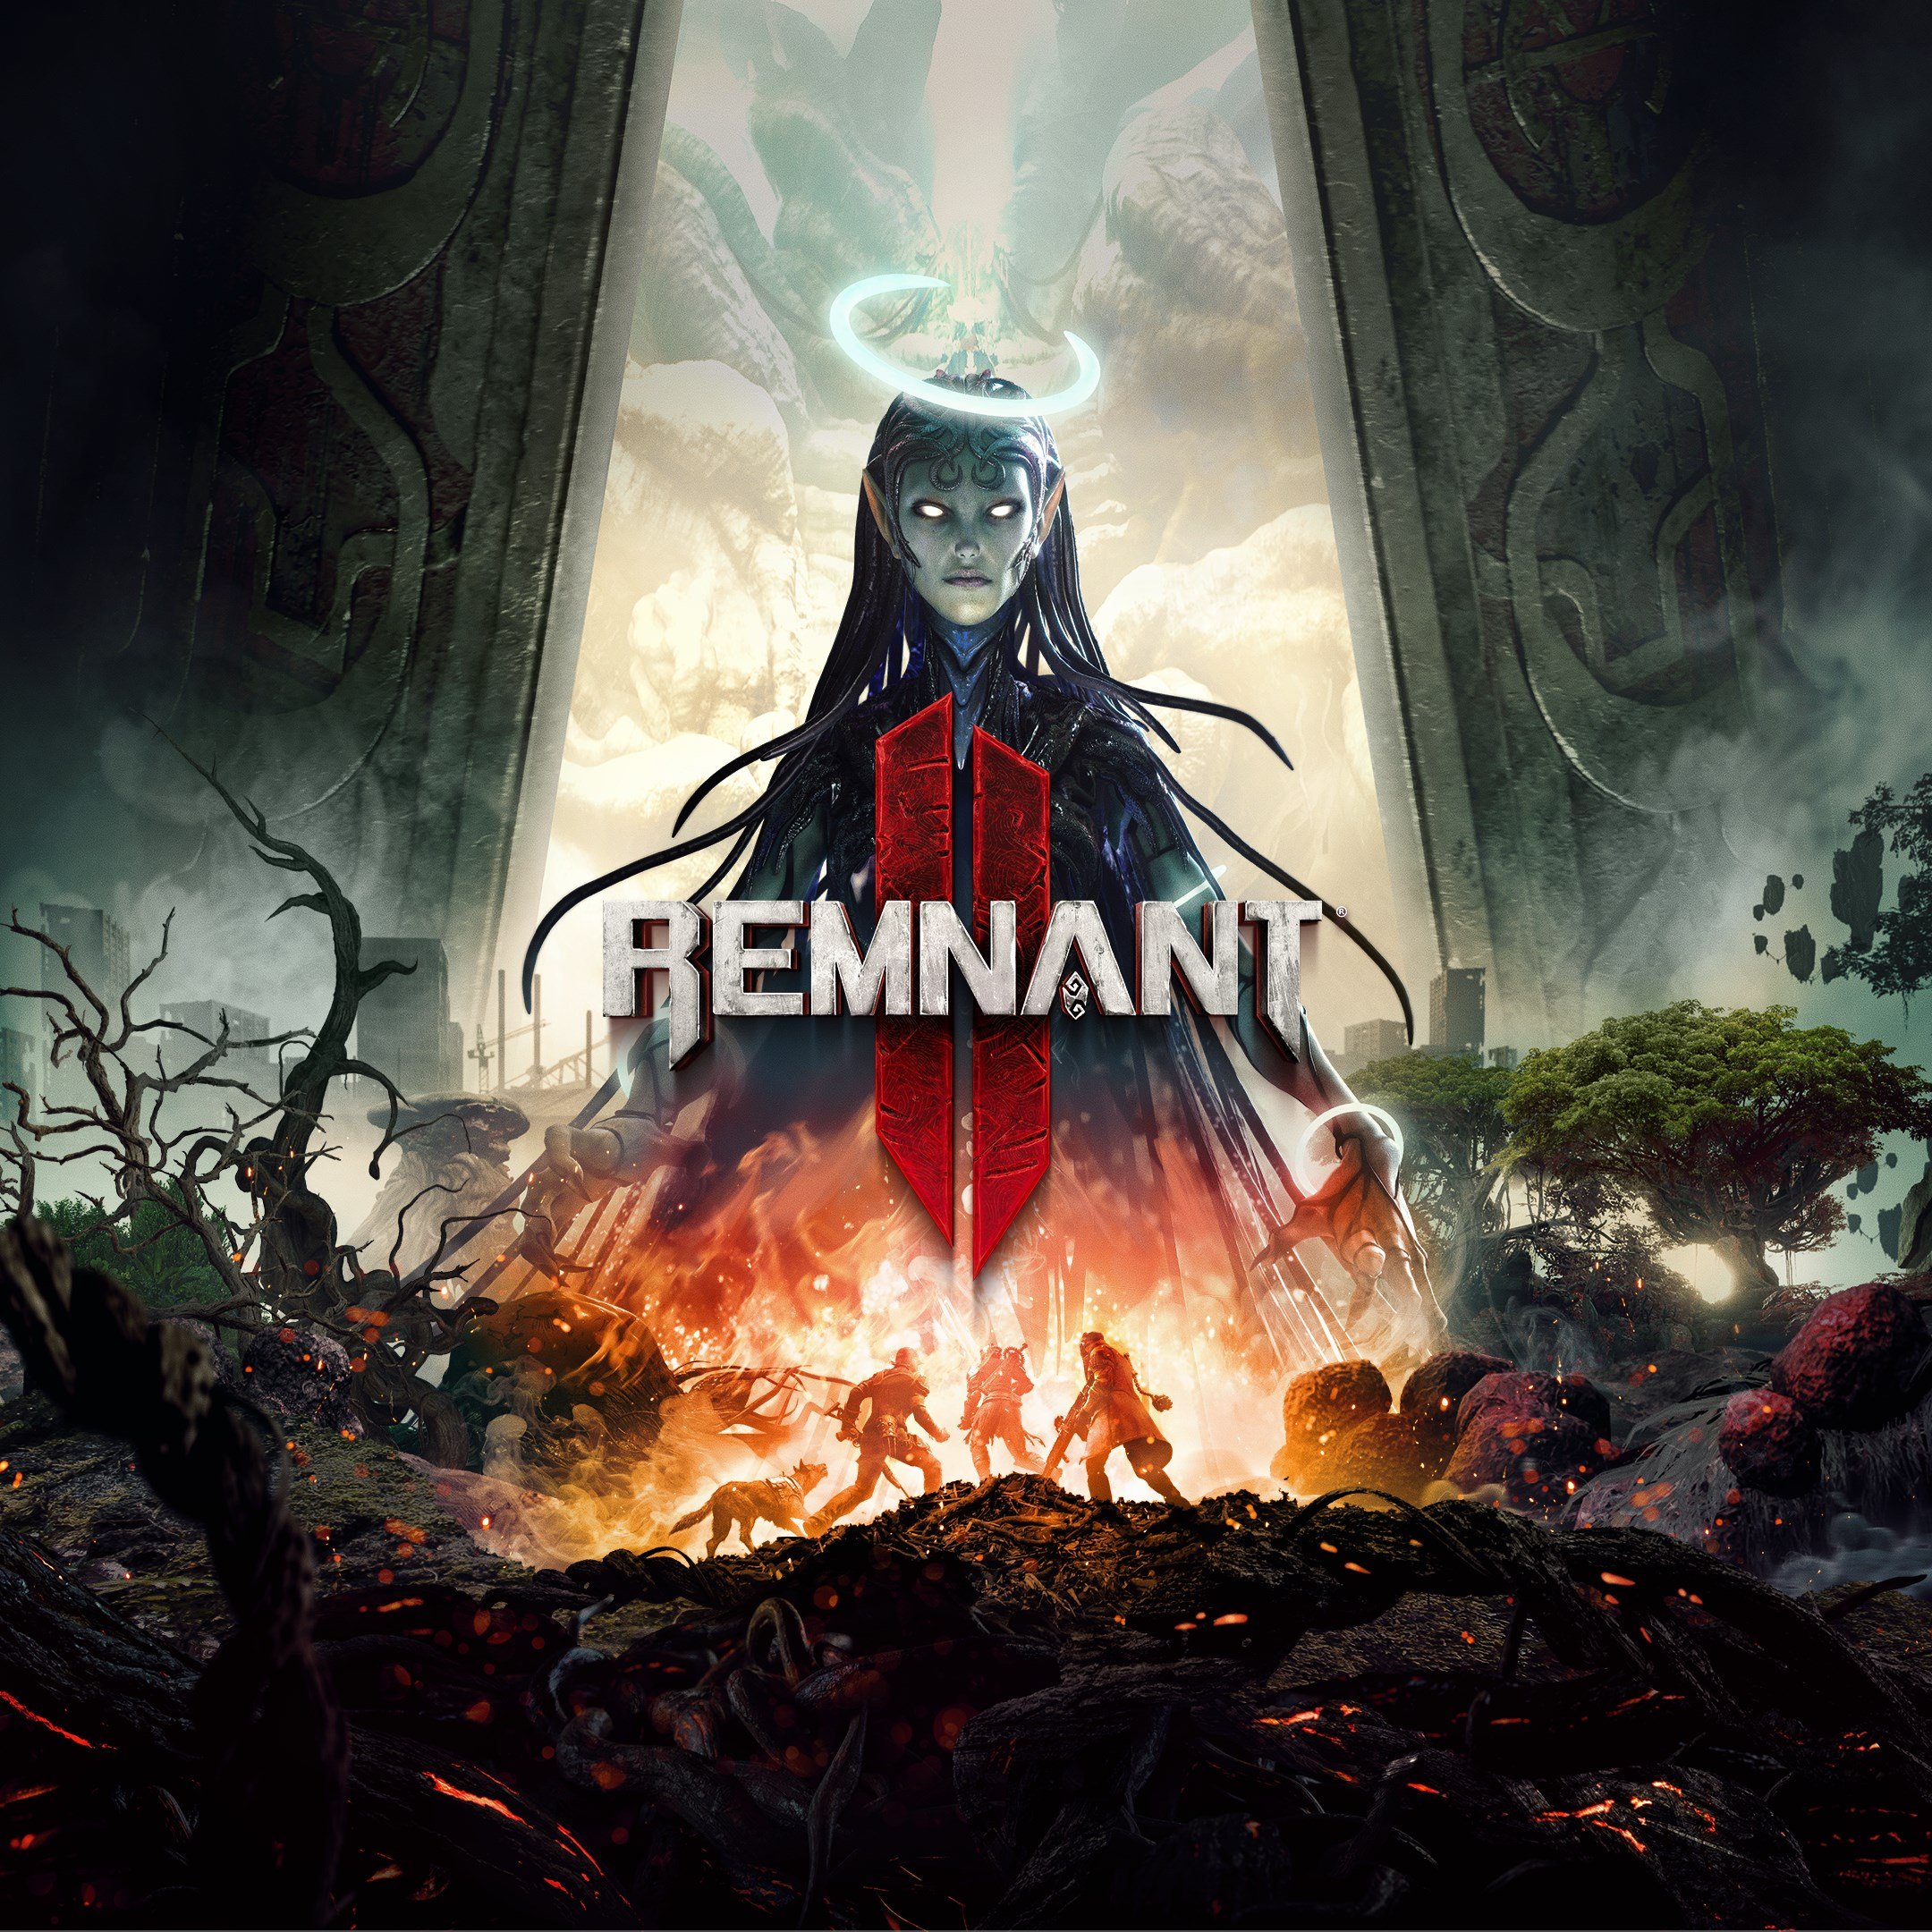 Boxart for Remnant 2